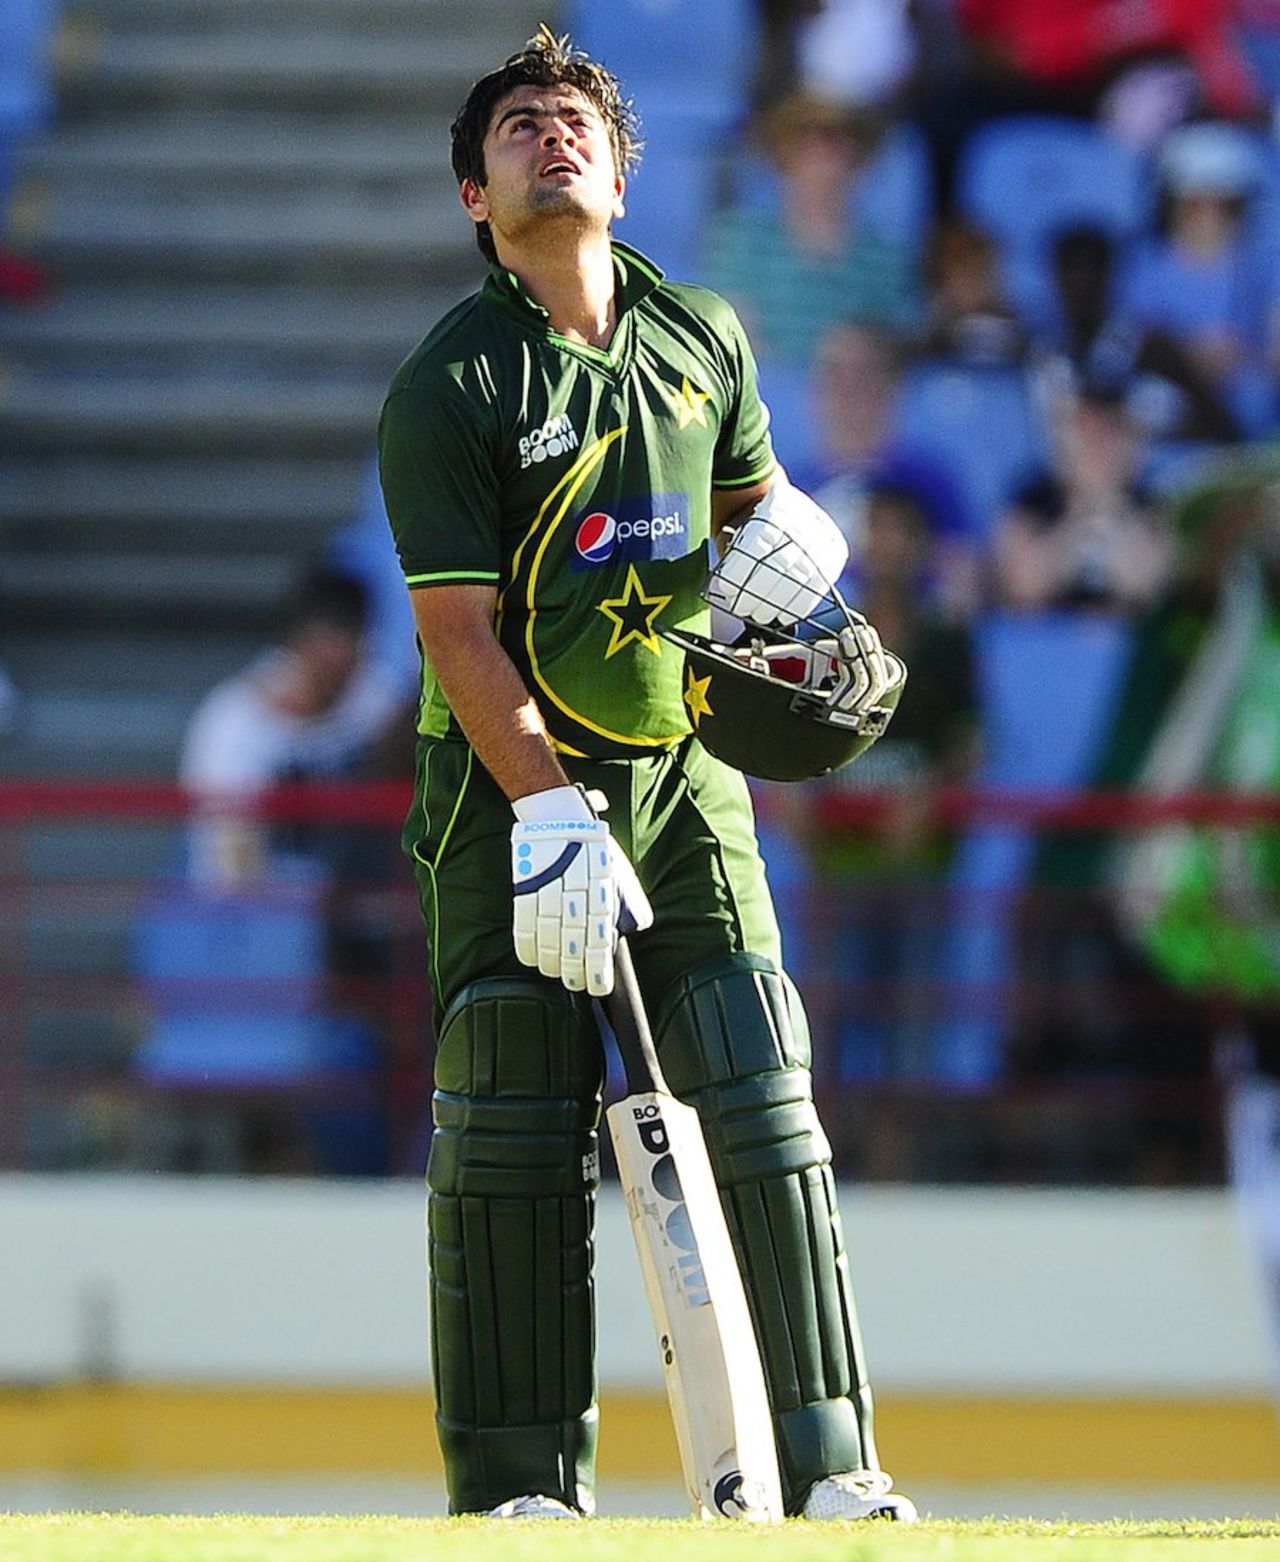 Ahmed Shehzad reached his century off 143 balls, West Indies v Pakistan, 2nd ODI, Gros Islet, April 25, 2011